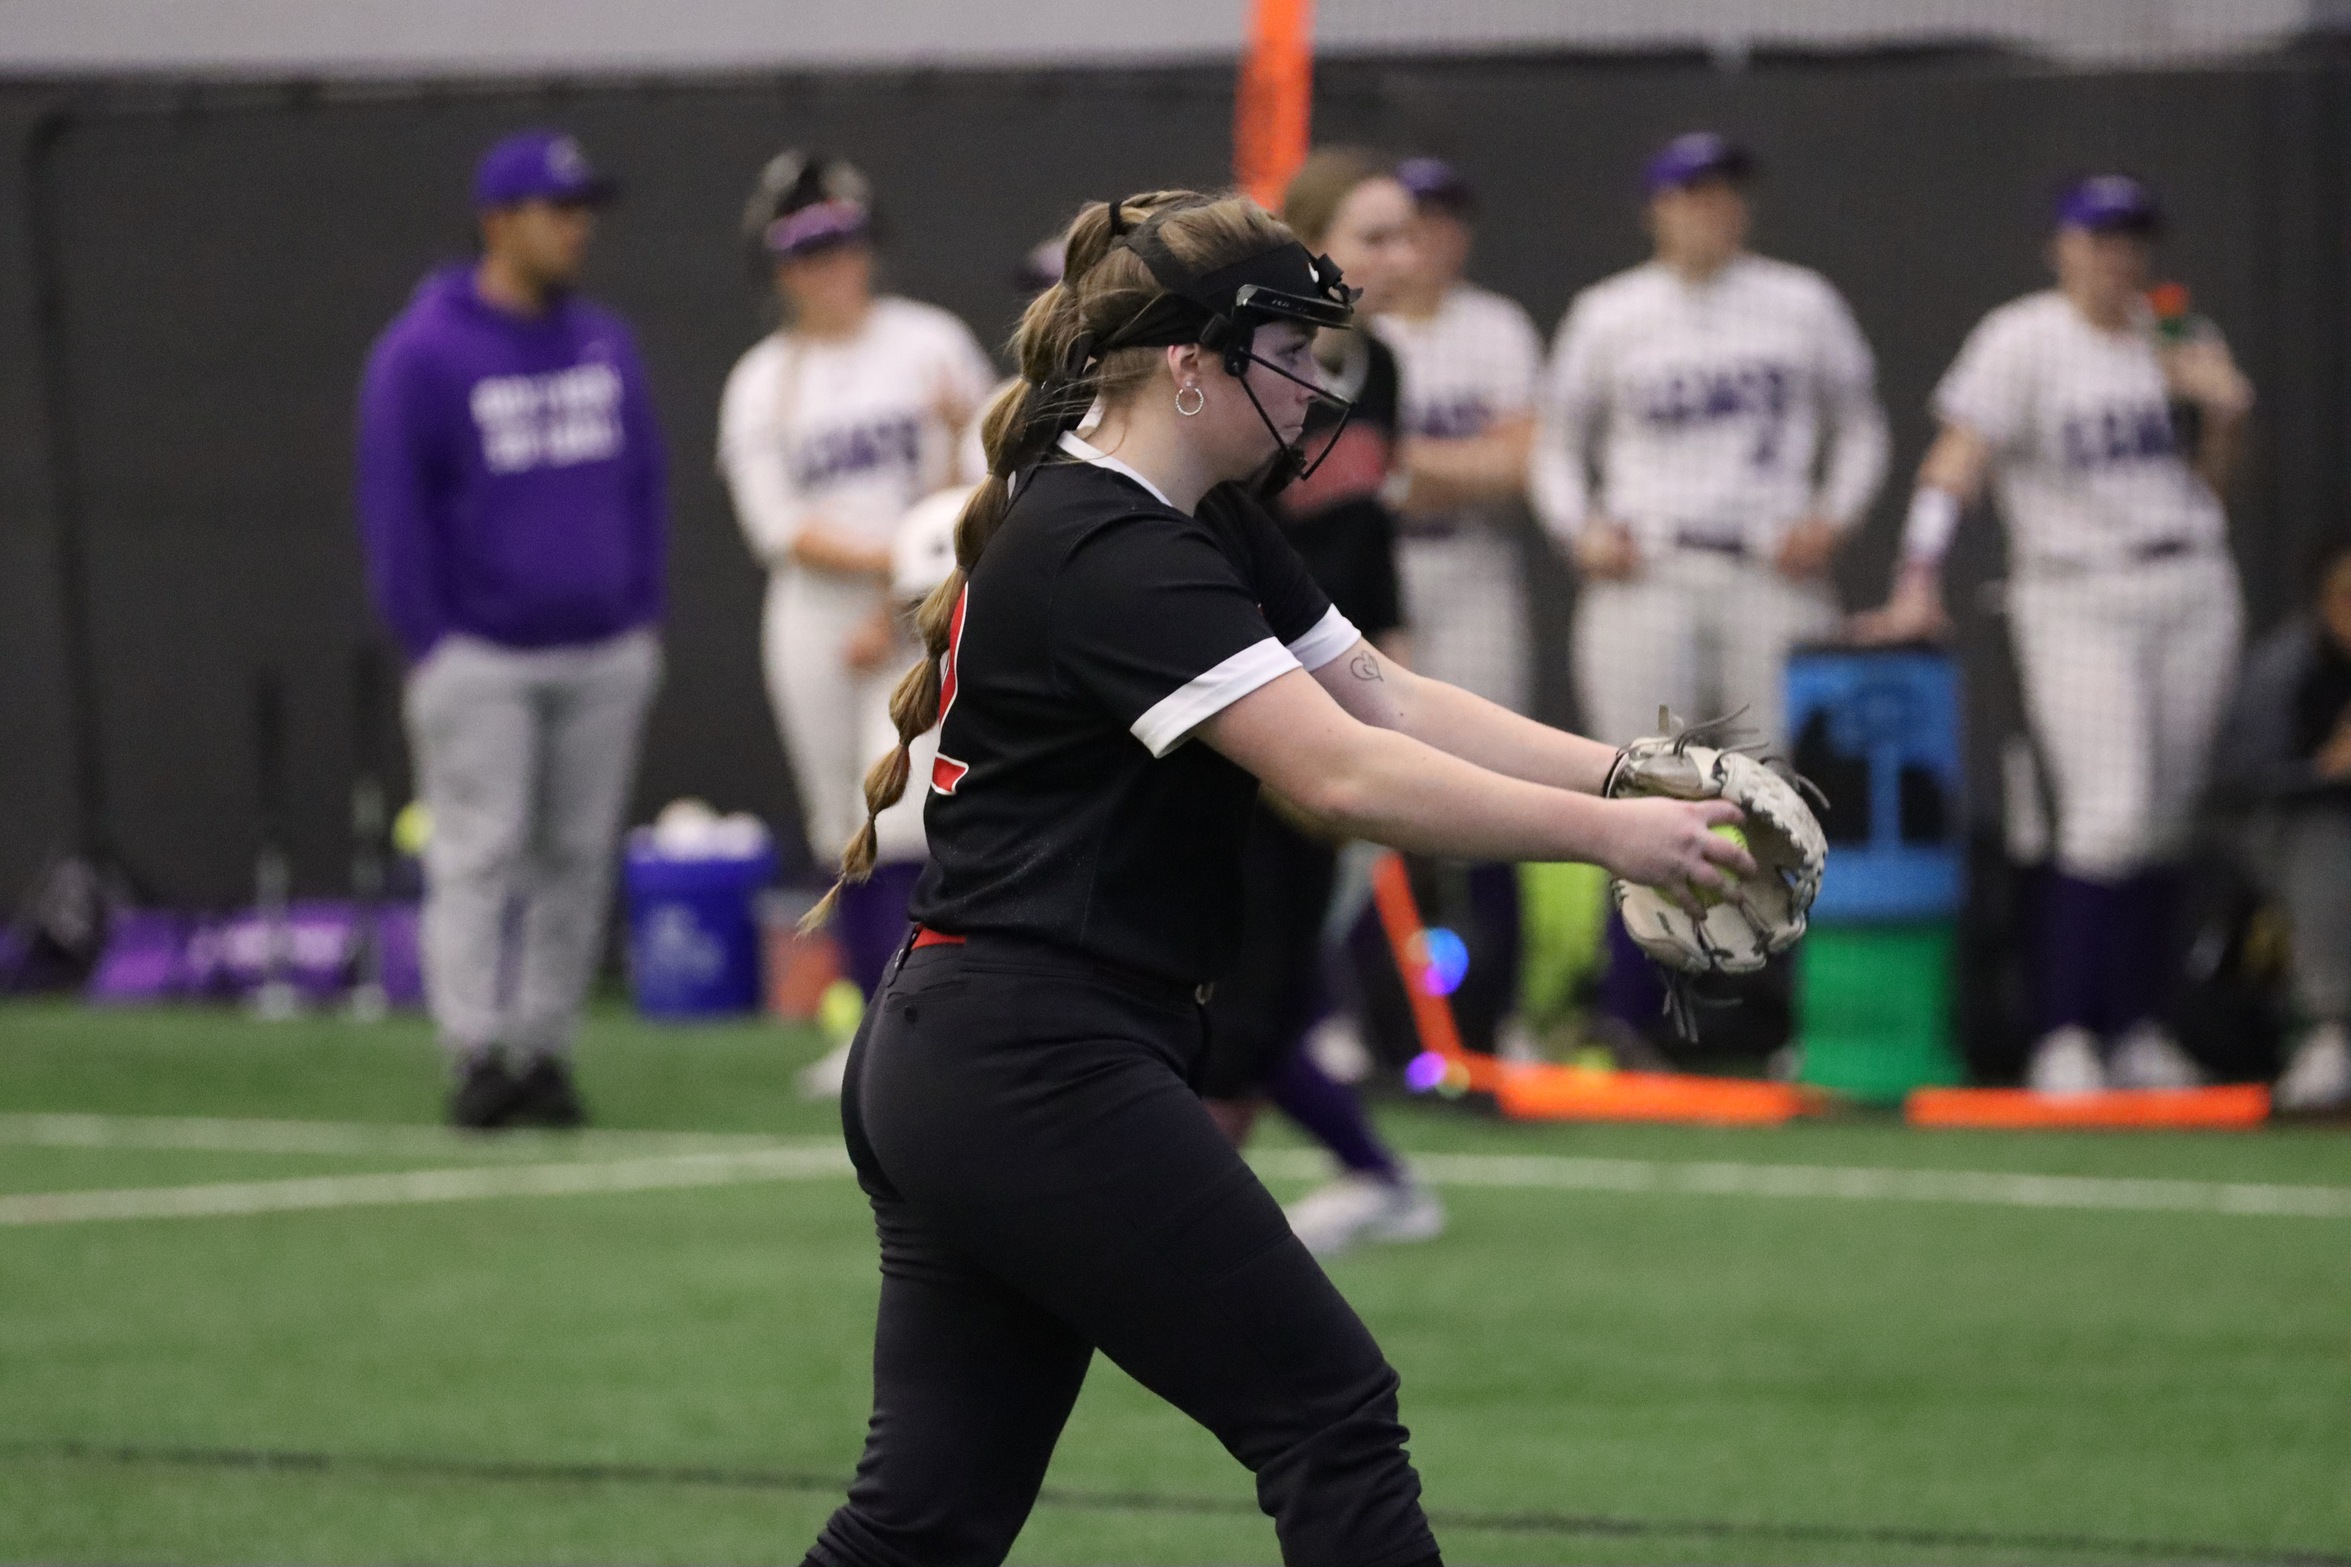 Softball sweeps both games against Goshen and IU South Bend